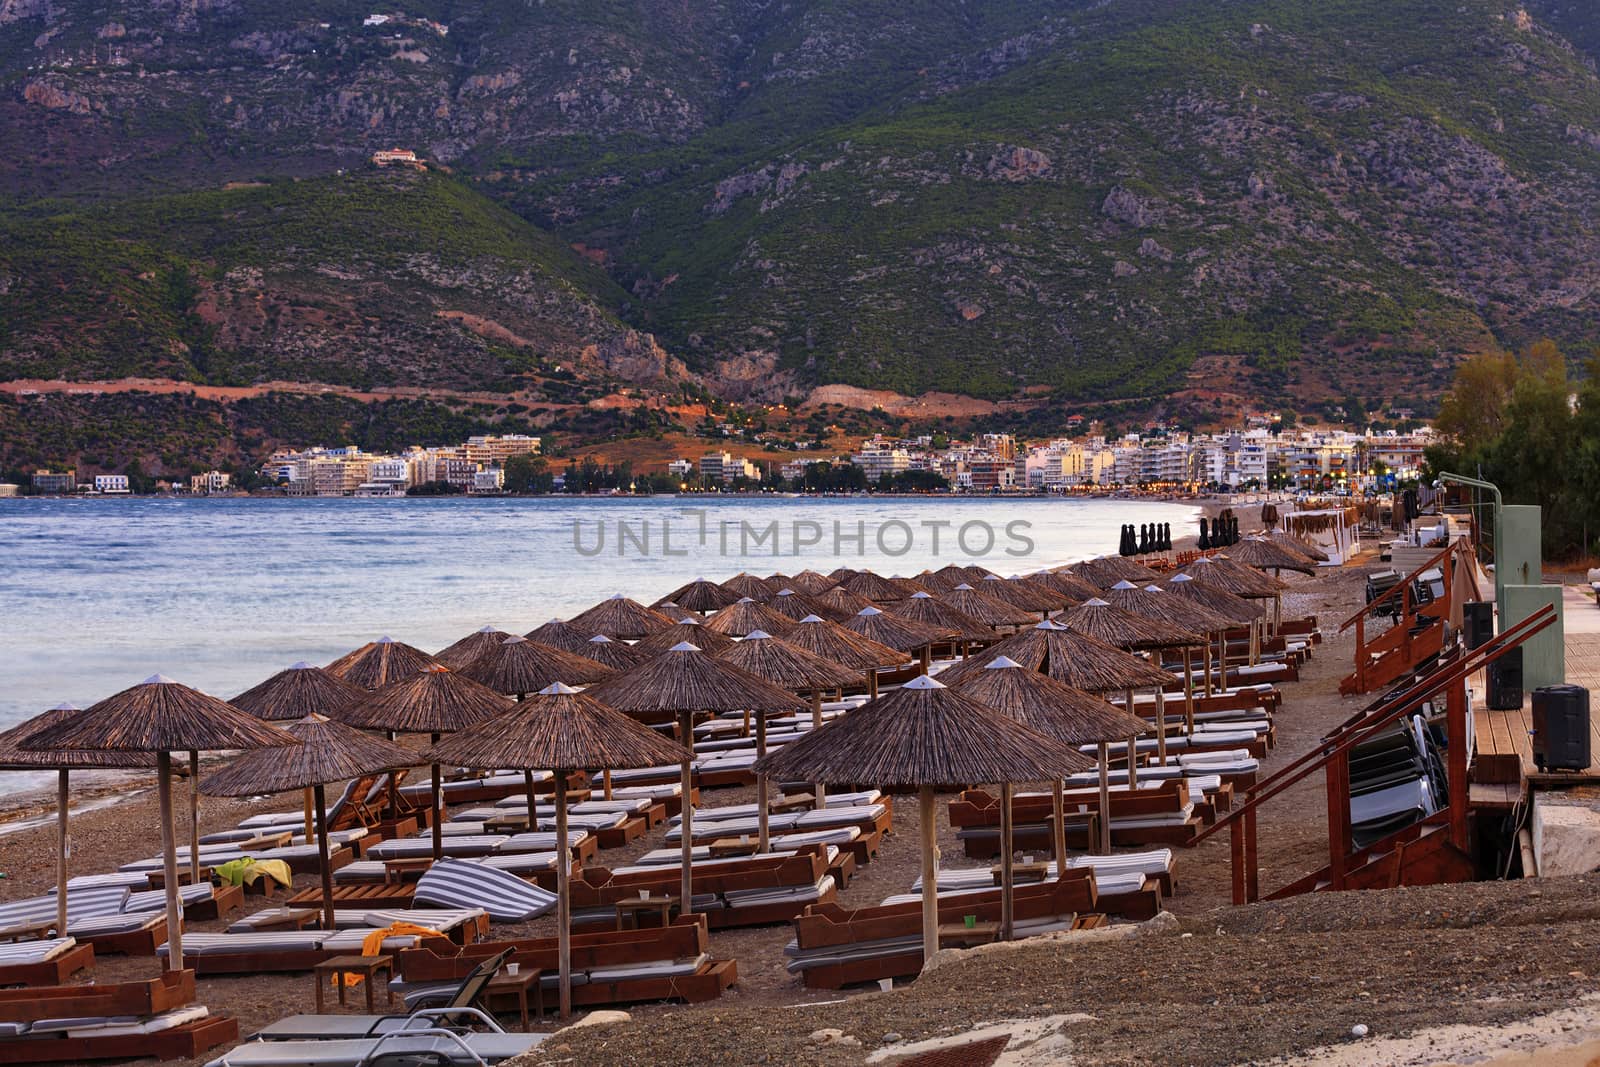 Thatched peaks of beach umbrellas with deck chairs on the deserted shore of the sea promenade against the background of evening red twilight light and the rays of the setting sun, mountain ranges in haze and blur with the city of Loutraki in Greece on the horizon.